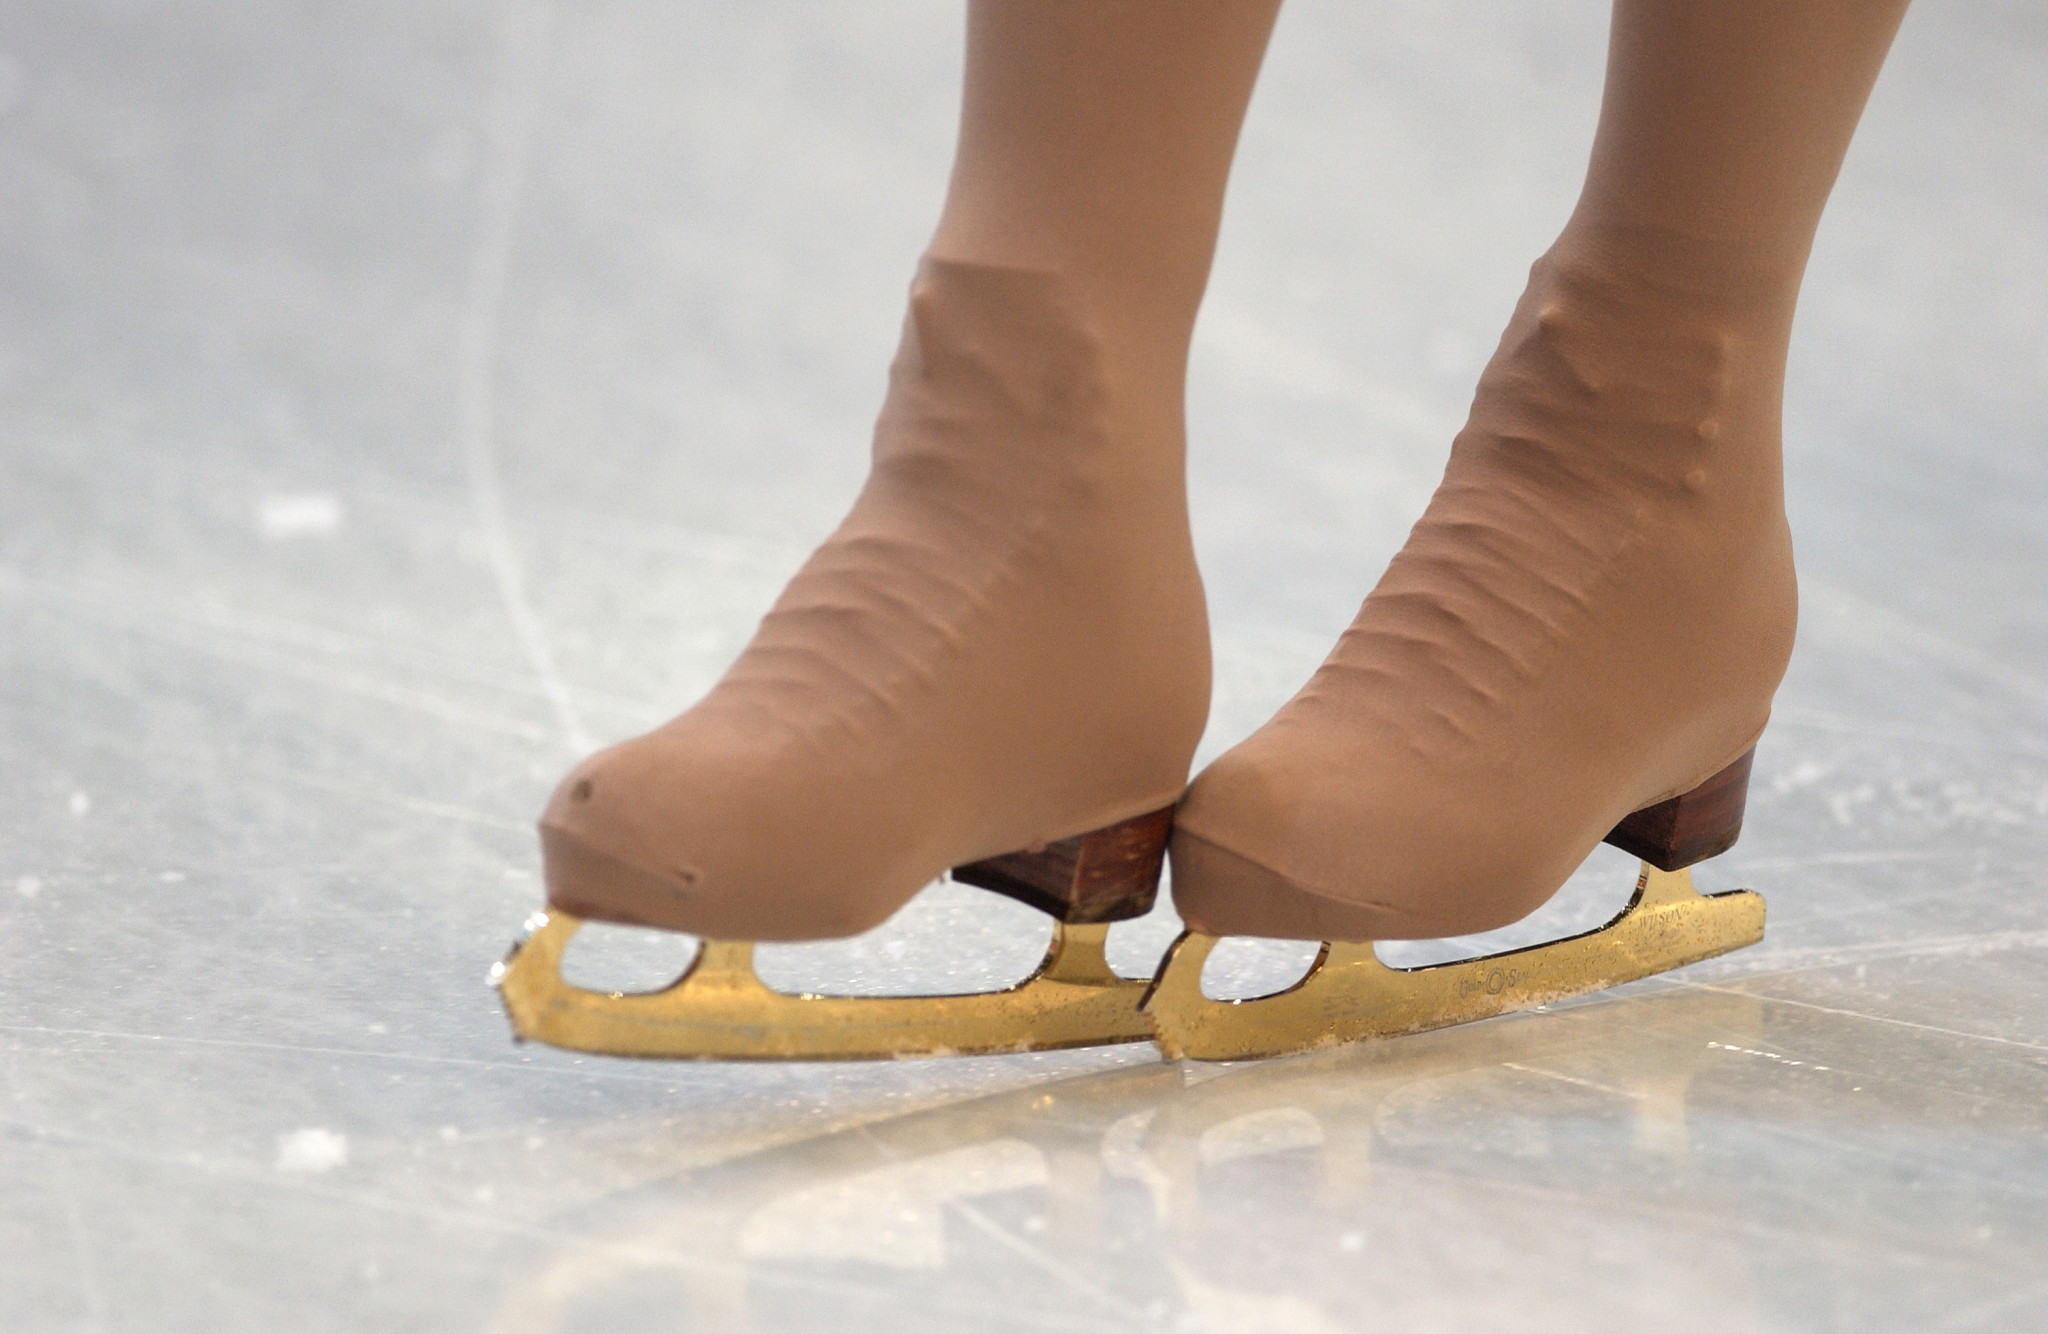 US Figure Skating has announced the host cities for a quartet of competitions in 2022 ©Getty Images